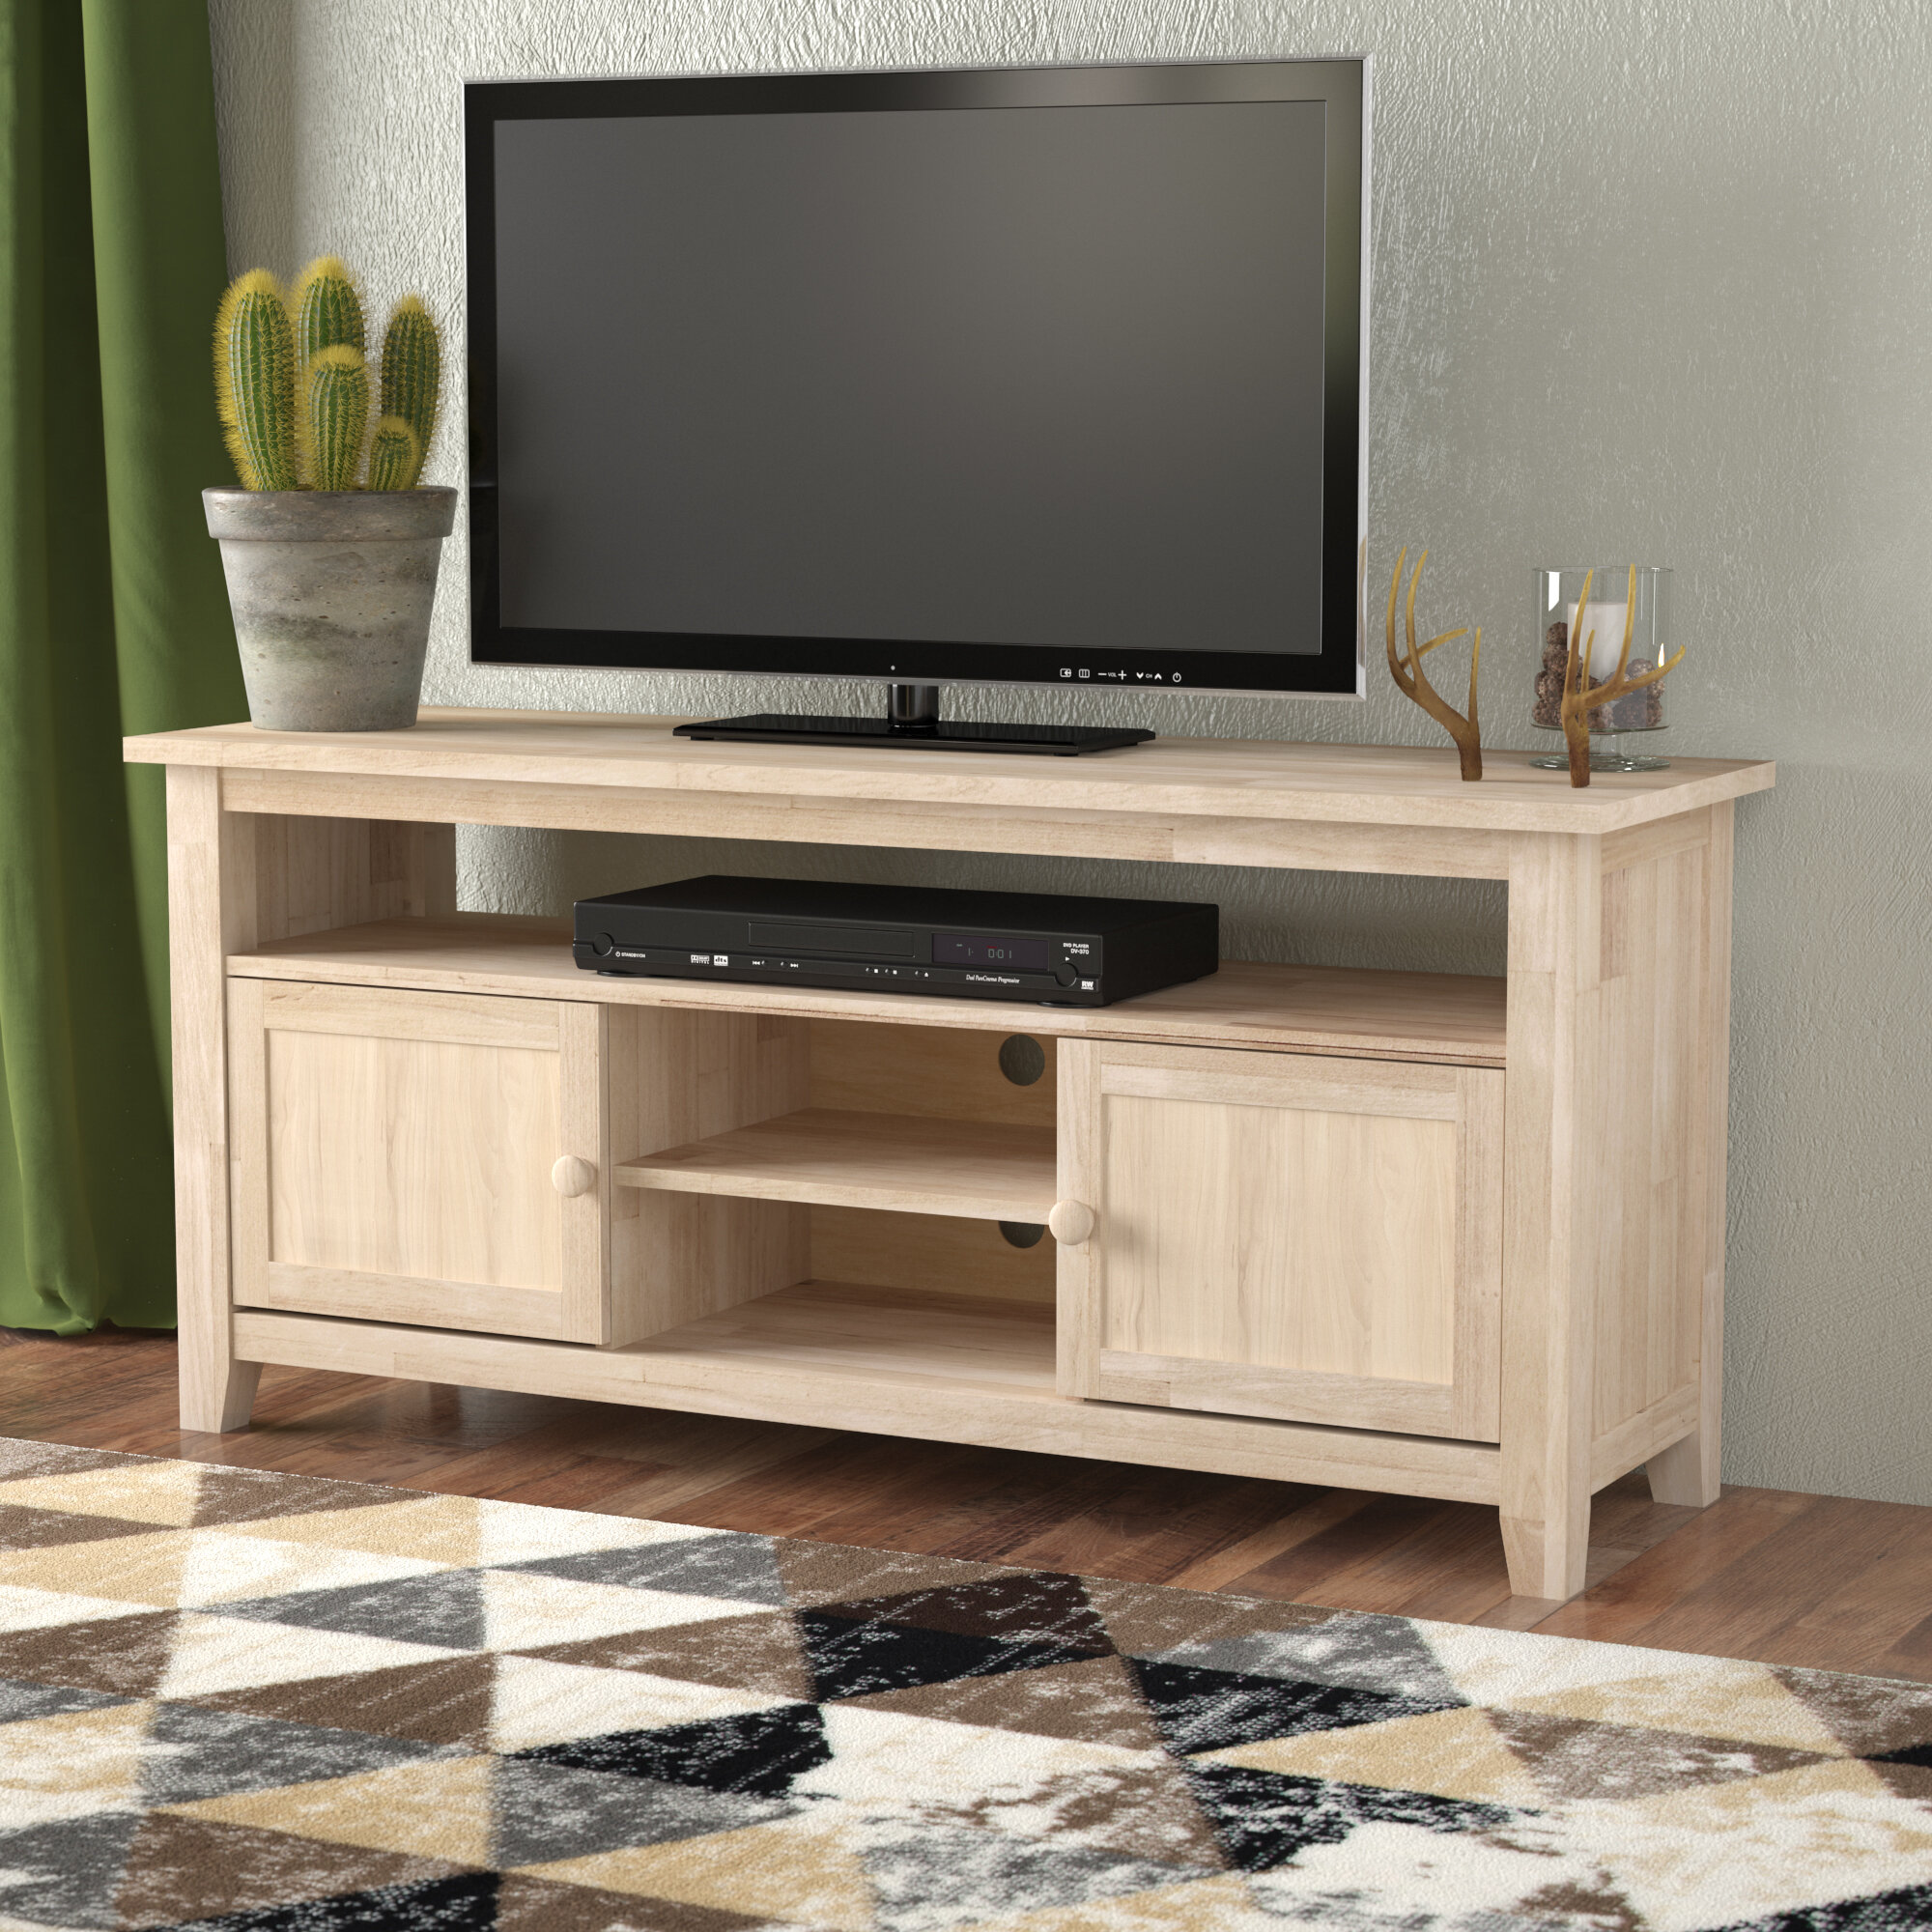 Loon Peak Ramapo Solid Wood Tv Stand For Tvs Up To 65 Reviews